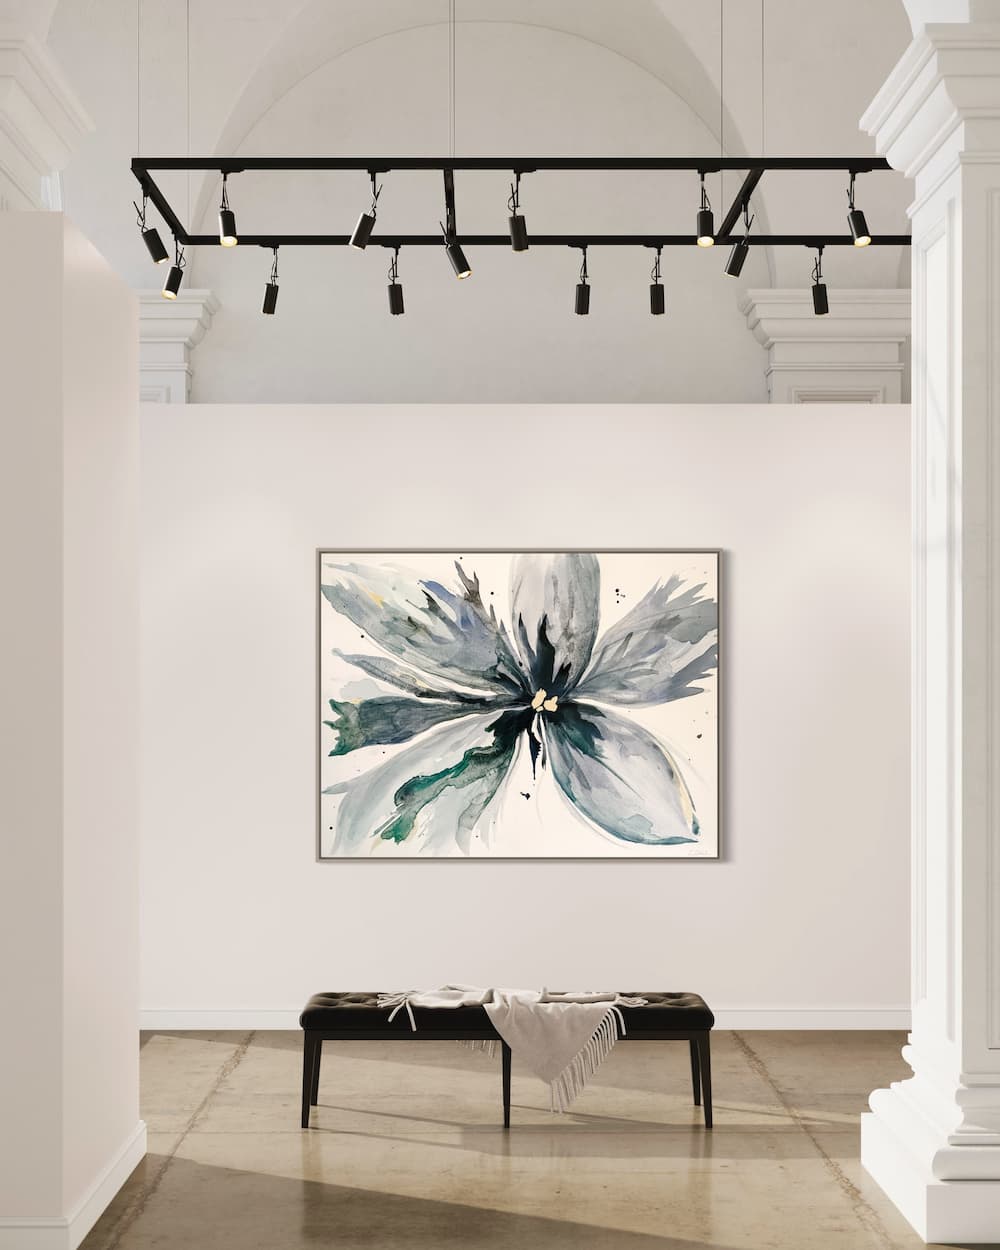 Charissa Owens Art large watercolor botanical in a gallery setting